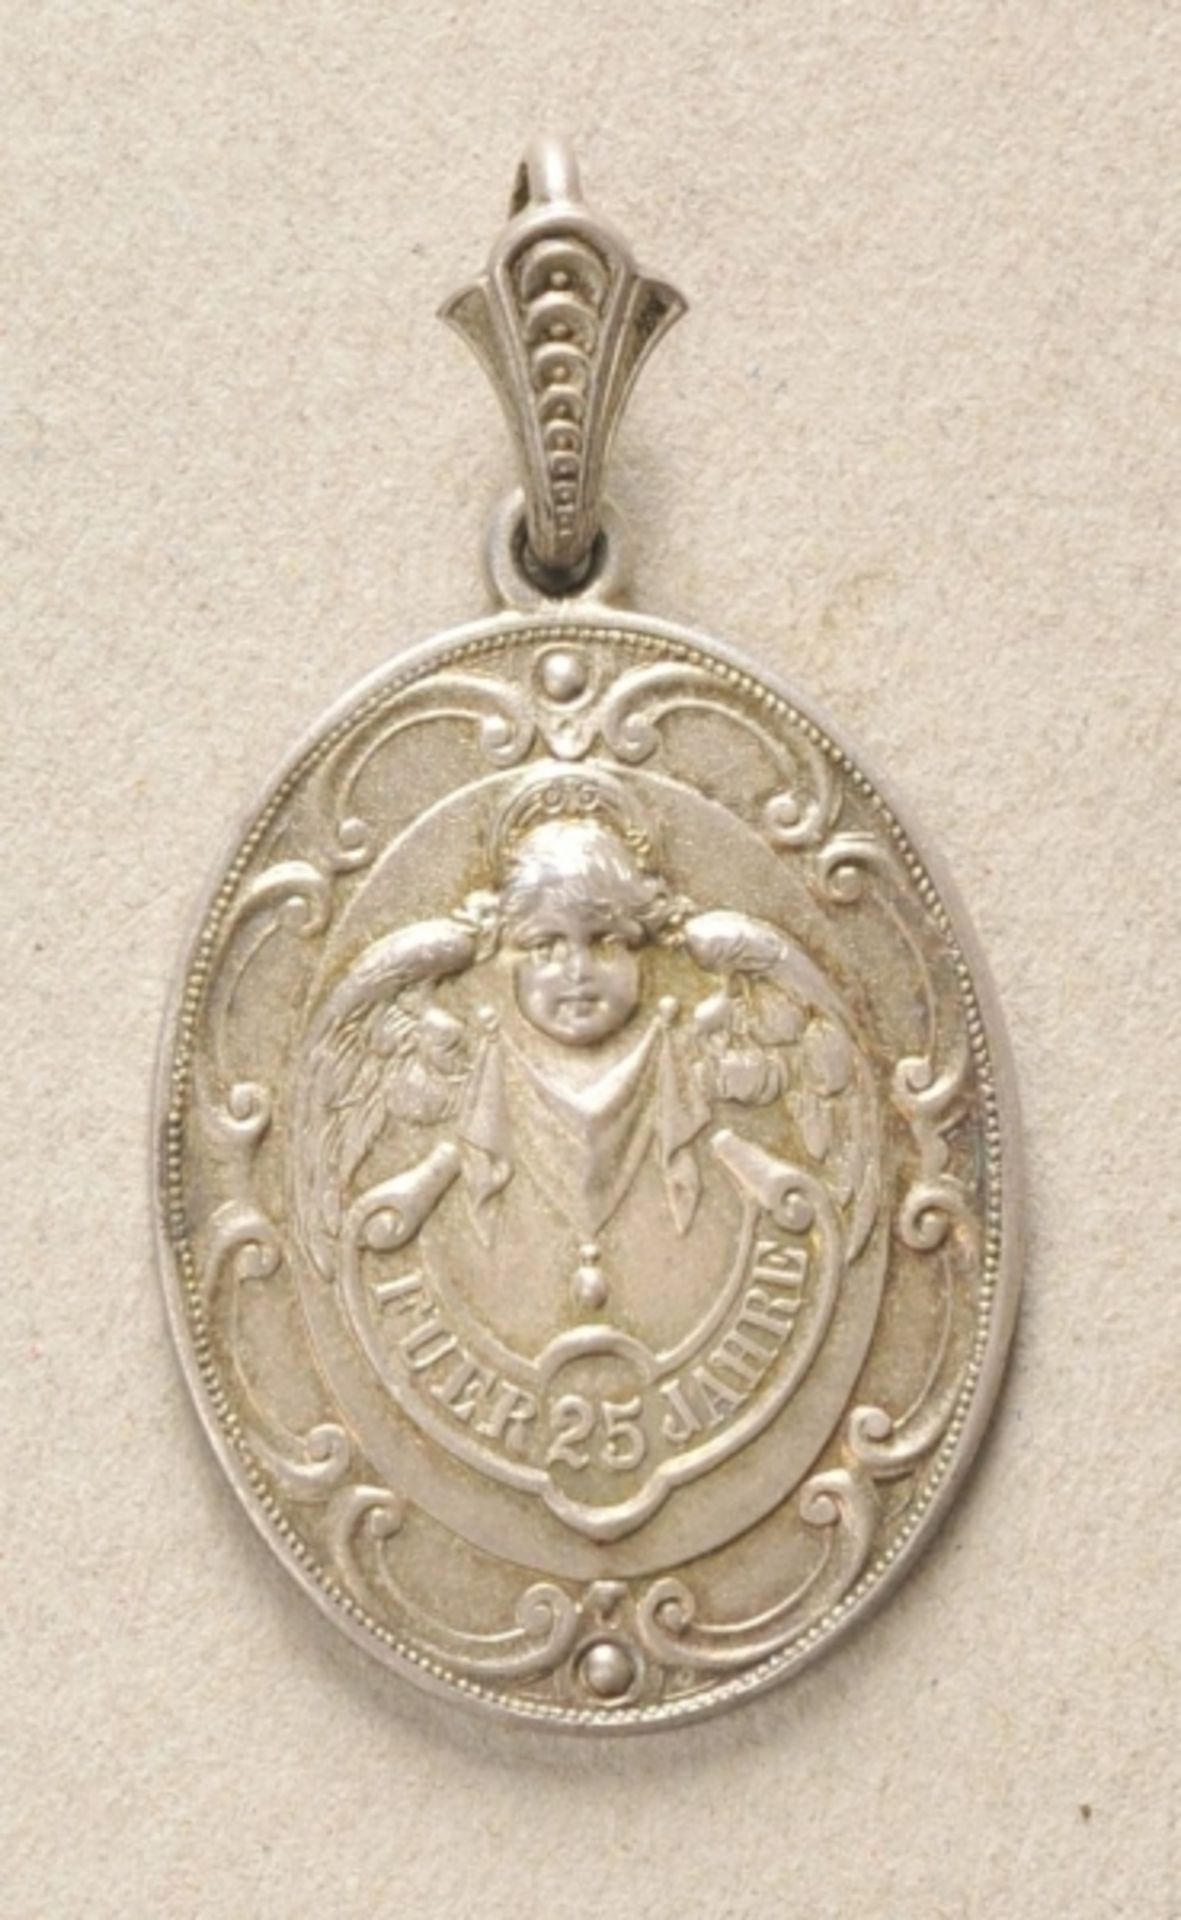 Baden: Jubilee medal for midwifes after 25 years of service. Silver, multiple hallmarked at the